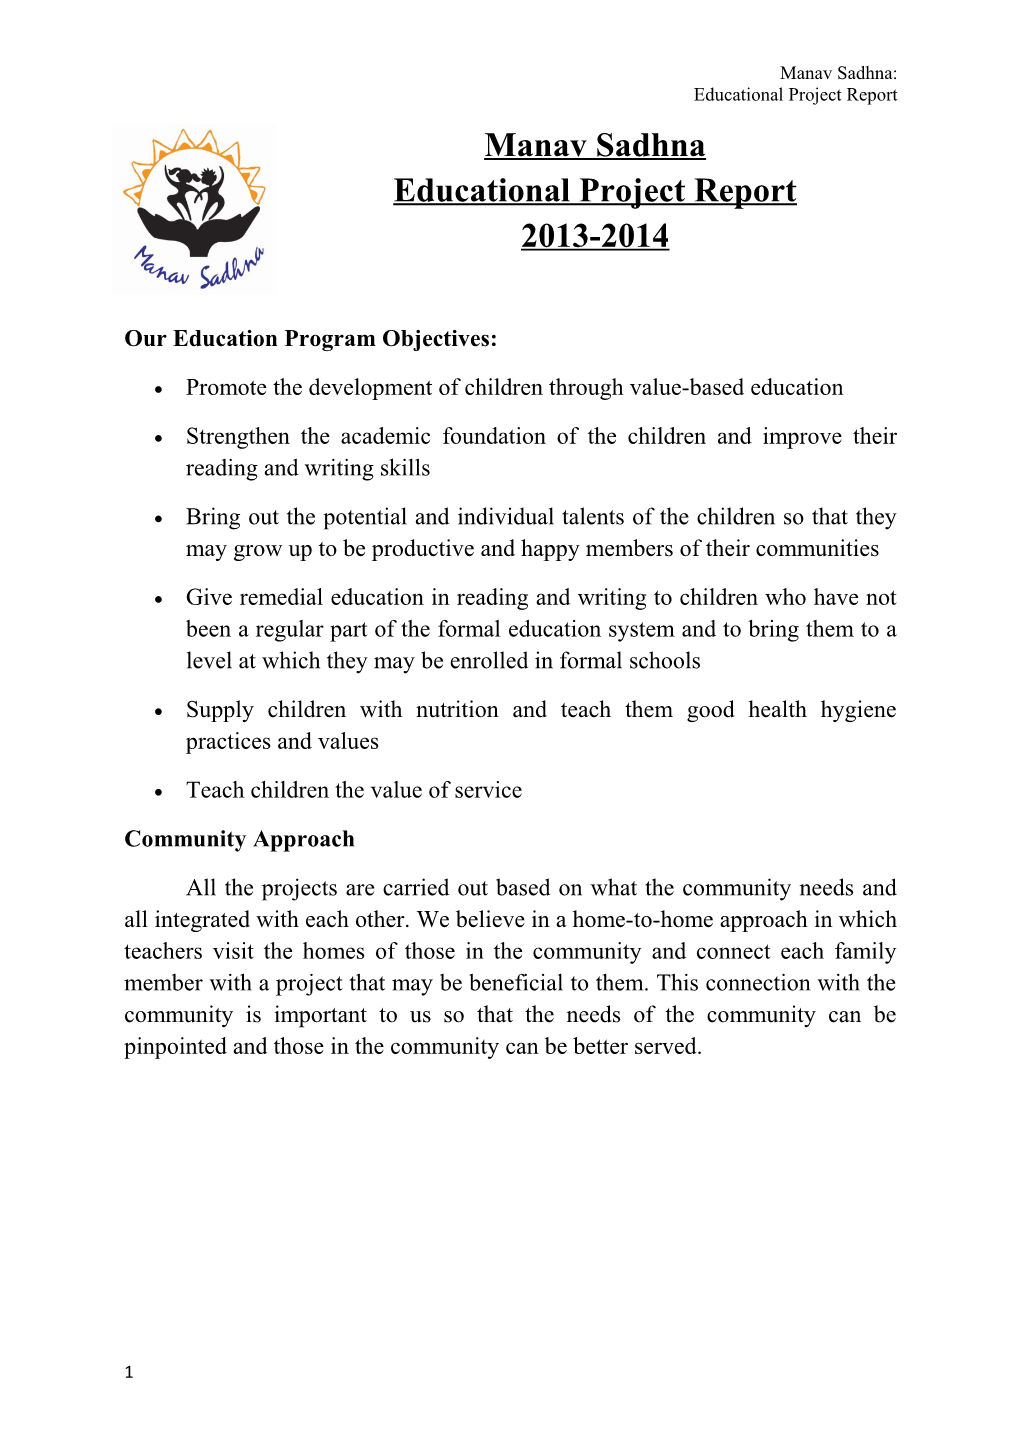 Our Education Program Objectives